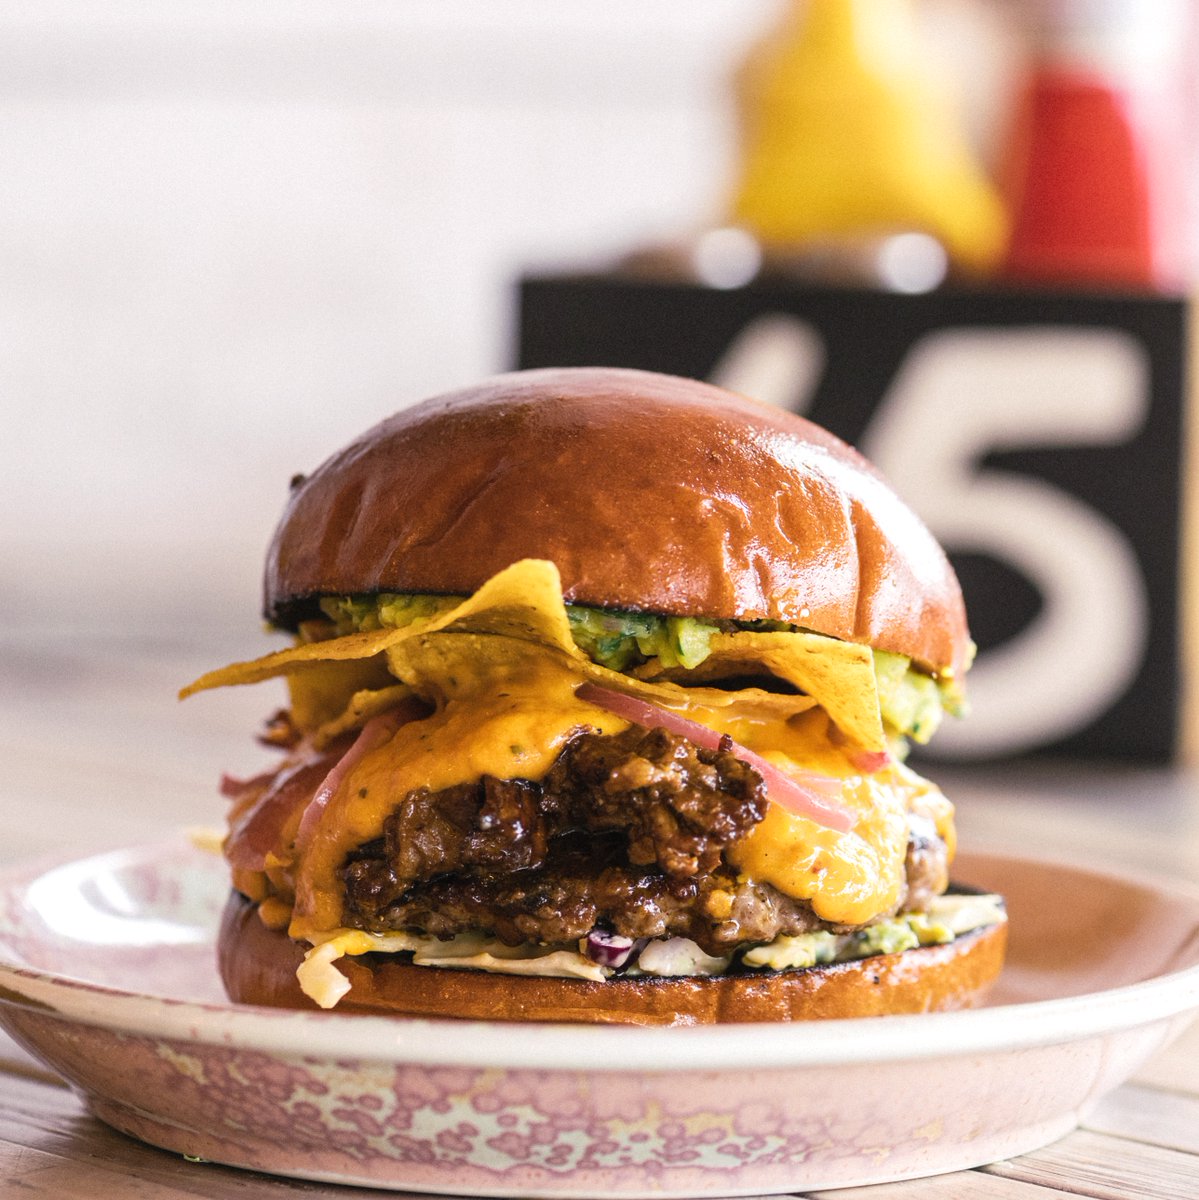 It's #NationalBurgerDay and there's only one way to celebrate - with some flame-grilled goodness. 🔥 We can't resist @HubboxSW's Rocky Barbacoa! 🤤 This is one 🍔 worth getting your hands dirty for! 👌